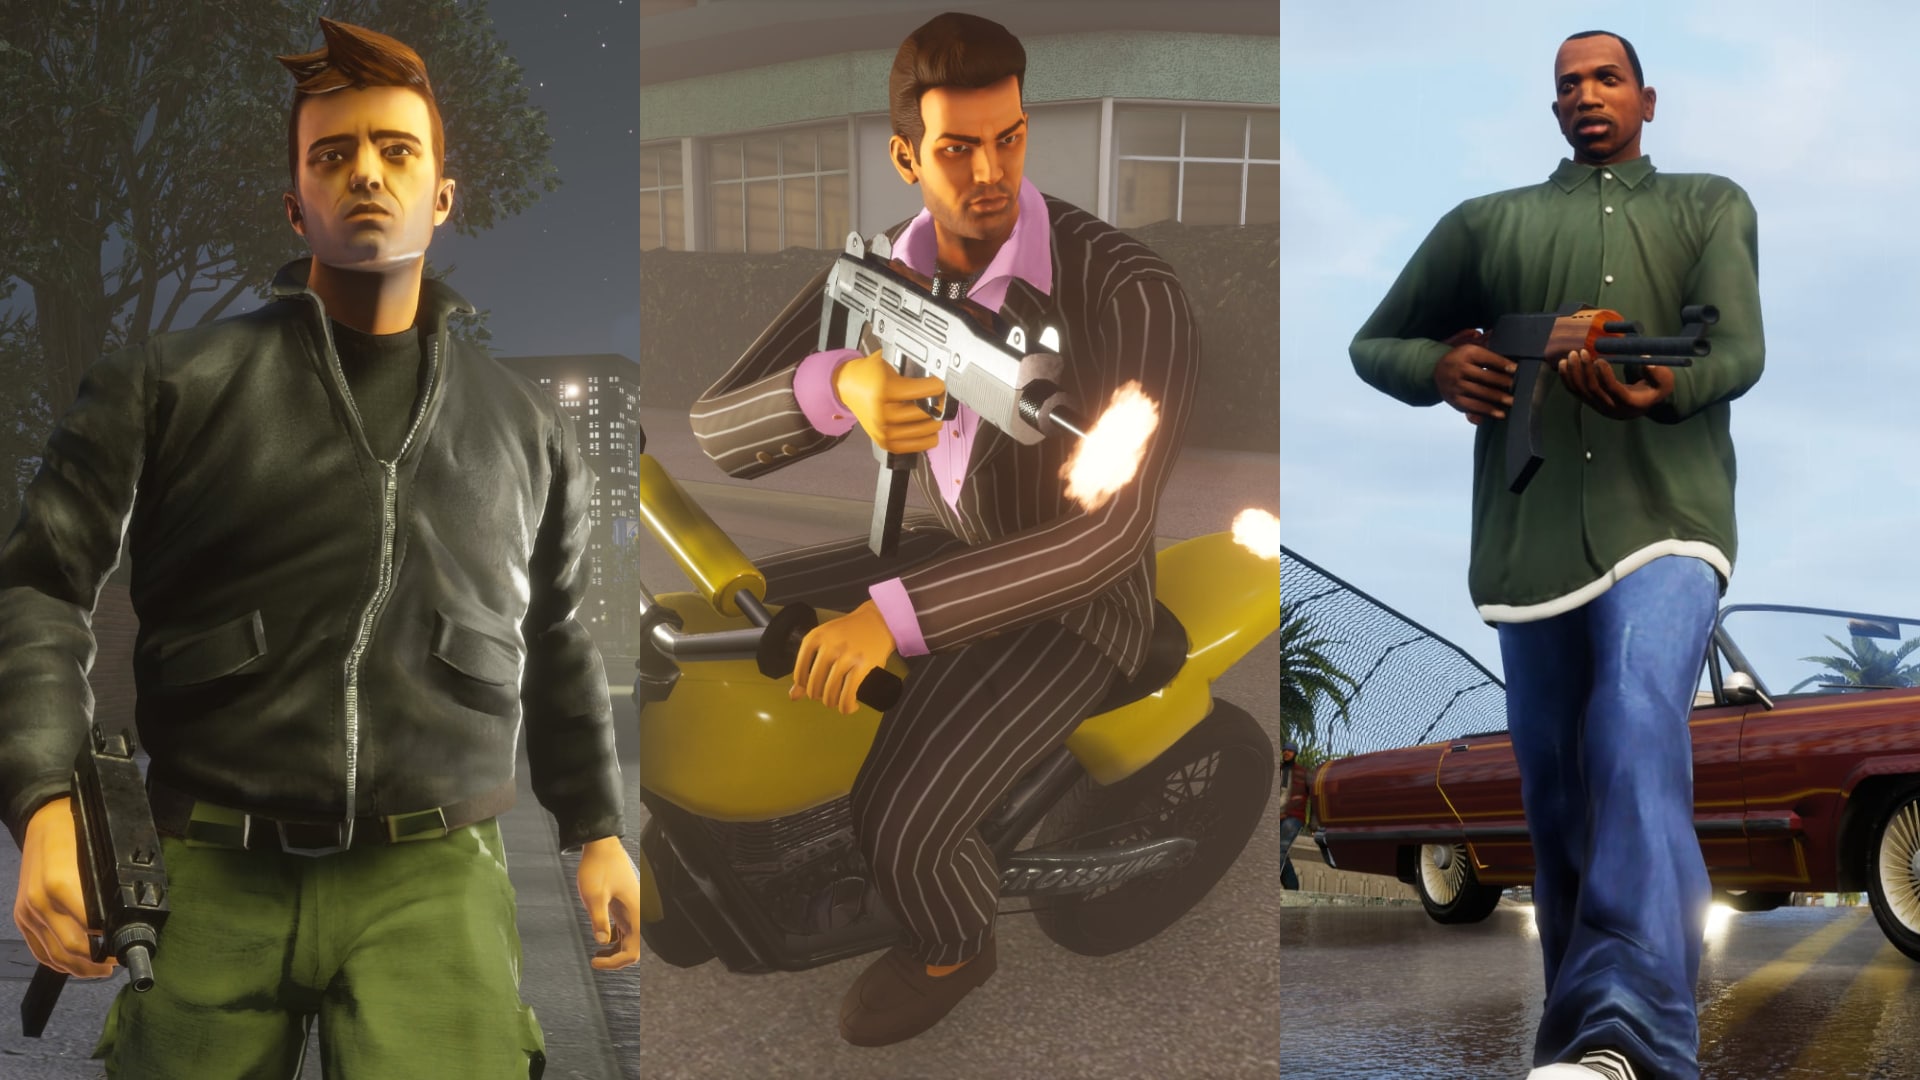 Netflix subscribers can now finally play GTA trilogy on Android